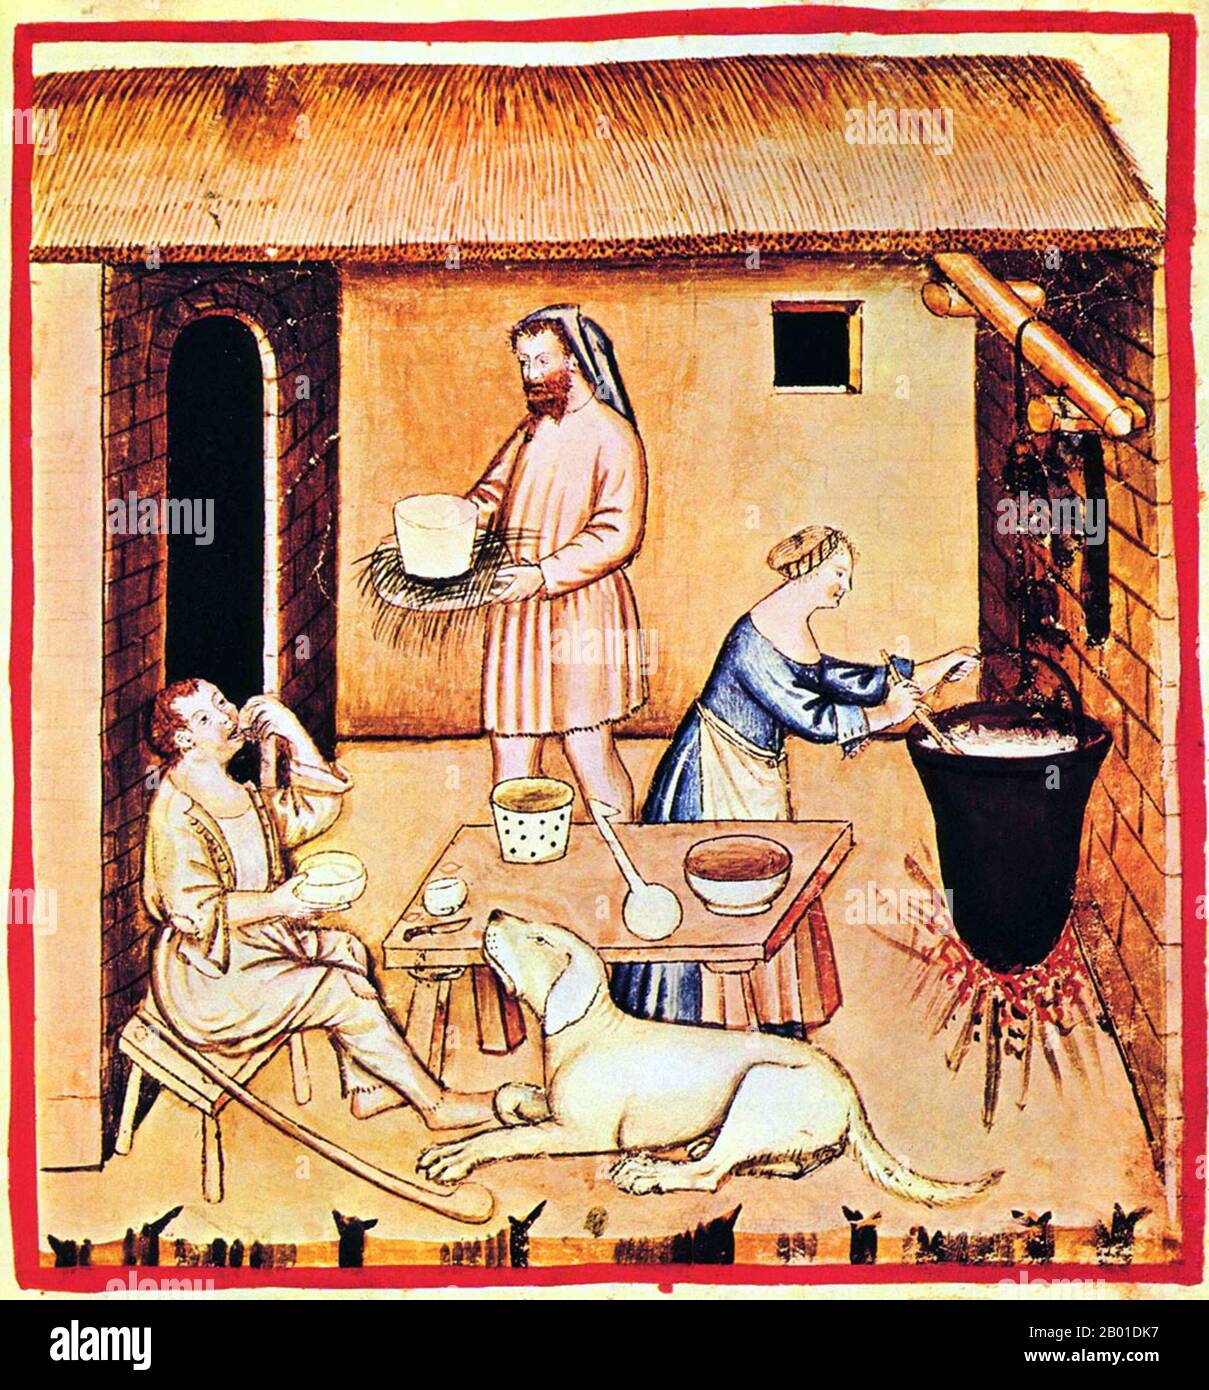 https://c8.alamy.com/comp/2B01DK7/iraqitaly-cheese-making-illustration-from-ibn-butlans-taqwim-al-sihha-or-maintenance-of-health-published-in-italy-as-the-tacuinum-sanitatis-14th-century-the-tacuinum-sometimes-taccuinum-sanitatis-is-a-medieval-handbook-on-health-and-wellbeing-based-on-the-taqwim-alsihha-an-eleventh-century-arab-medical-treatise-by-ibn-butlan-of-baghdad-ibn-butln-was-a-christian-physician-born-in-baghdad-and-who-died-in-1068-he-set-forth-six-elements-necessary-to-maintain-daily-health-2B01DK7.jpg